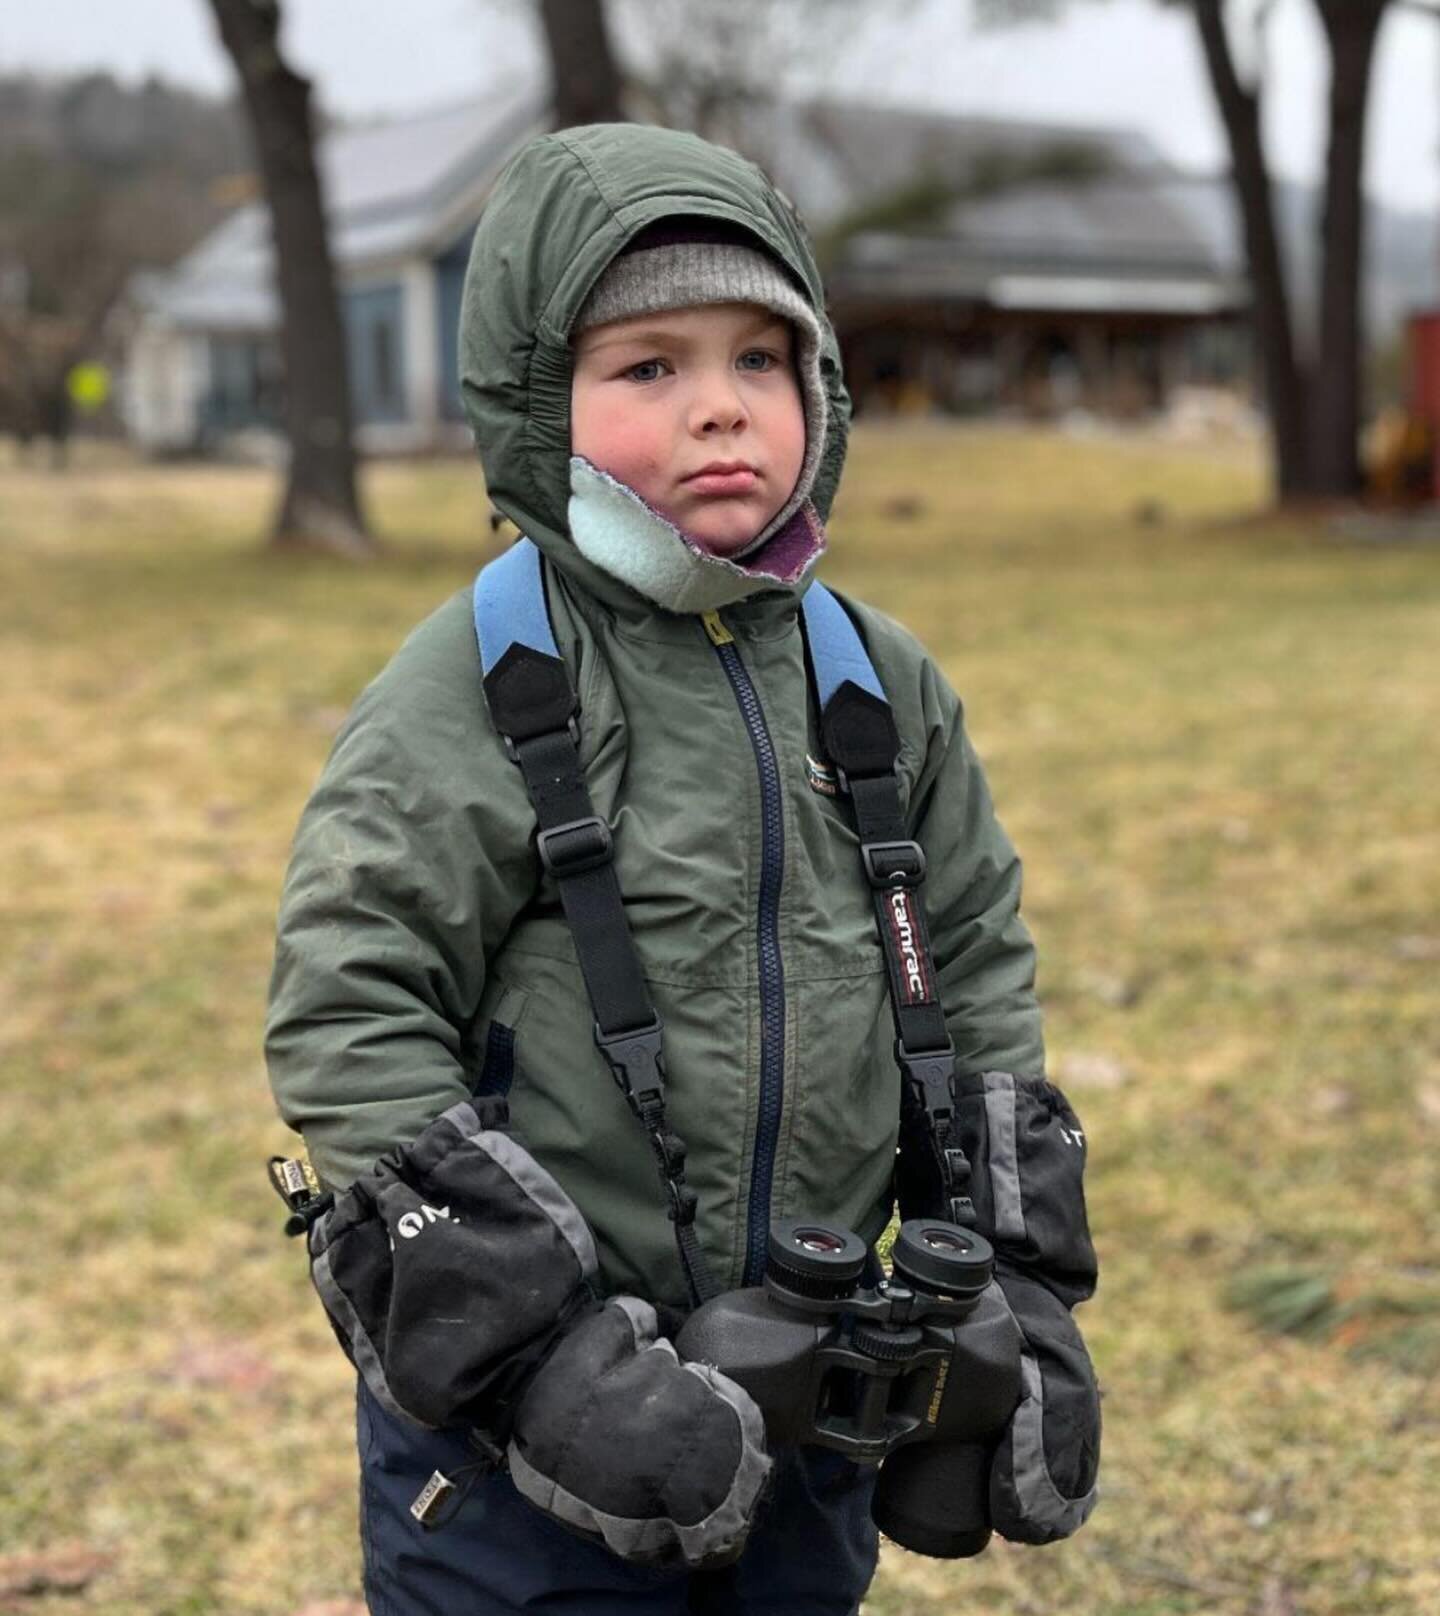 Occasionally, in the end of the week newsletter from Freddy&rsquo;s Forest Preschool, there is a picture in there like these ones. I am obsessed with them. I swear to god he loves his time there which makes these images of him all the more hilarious.